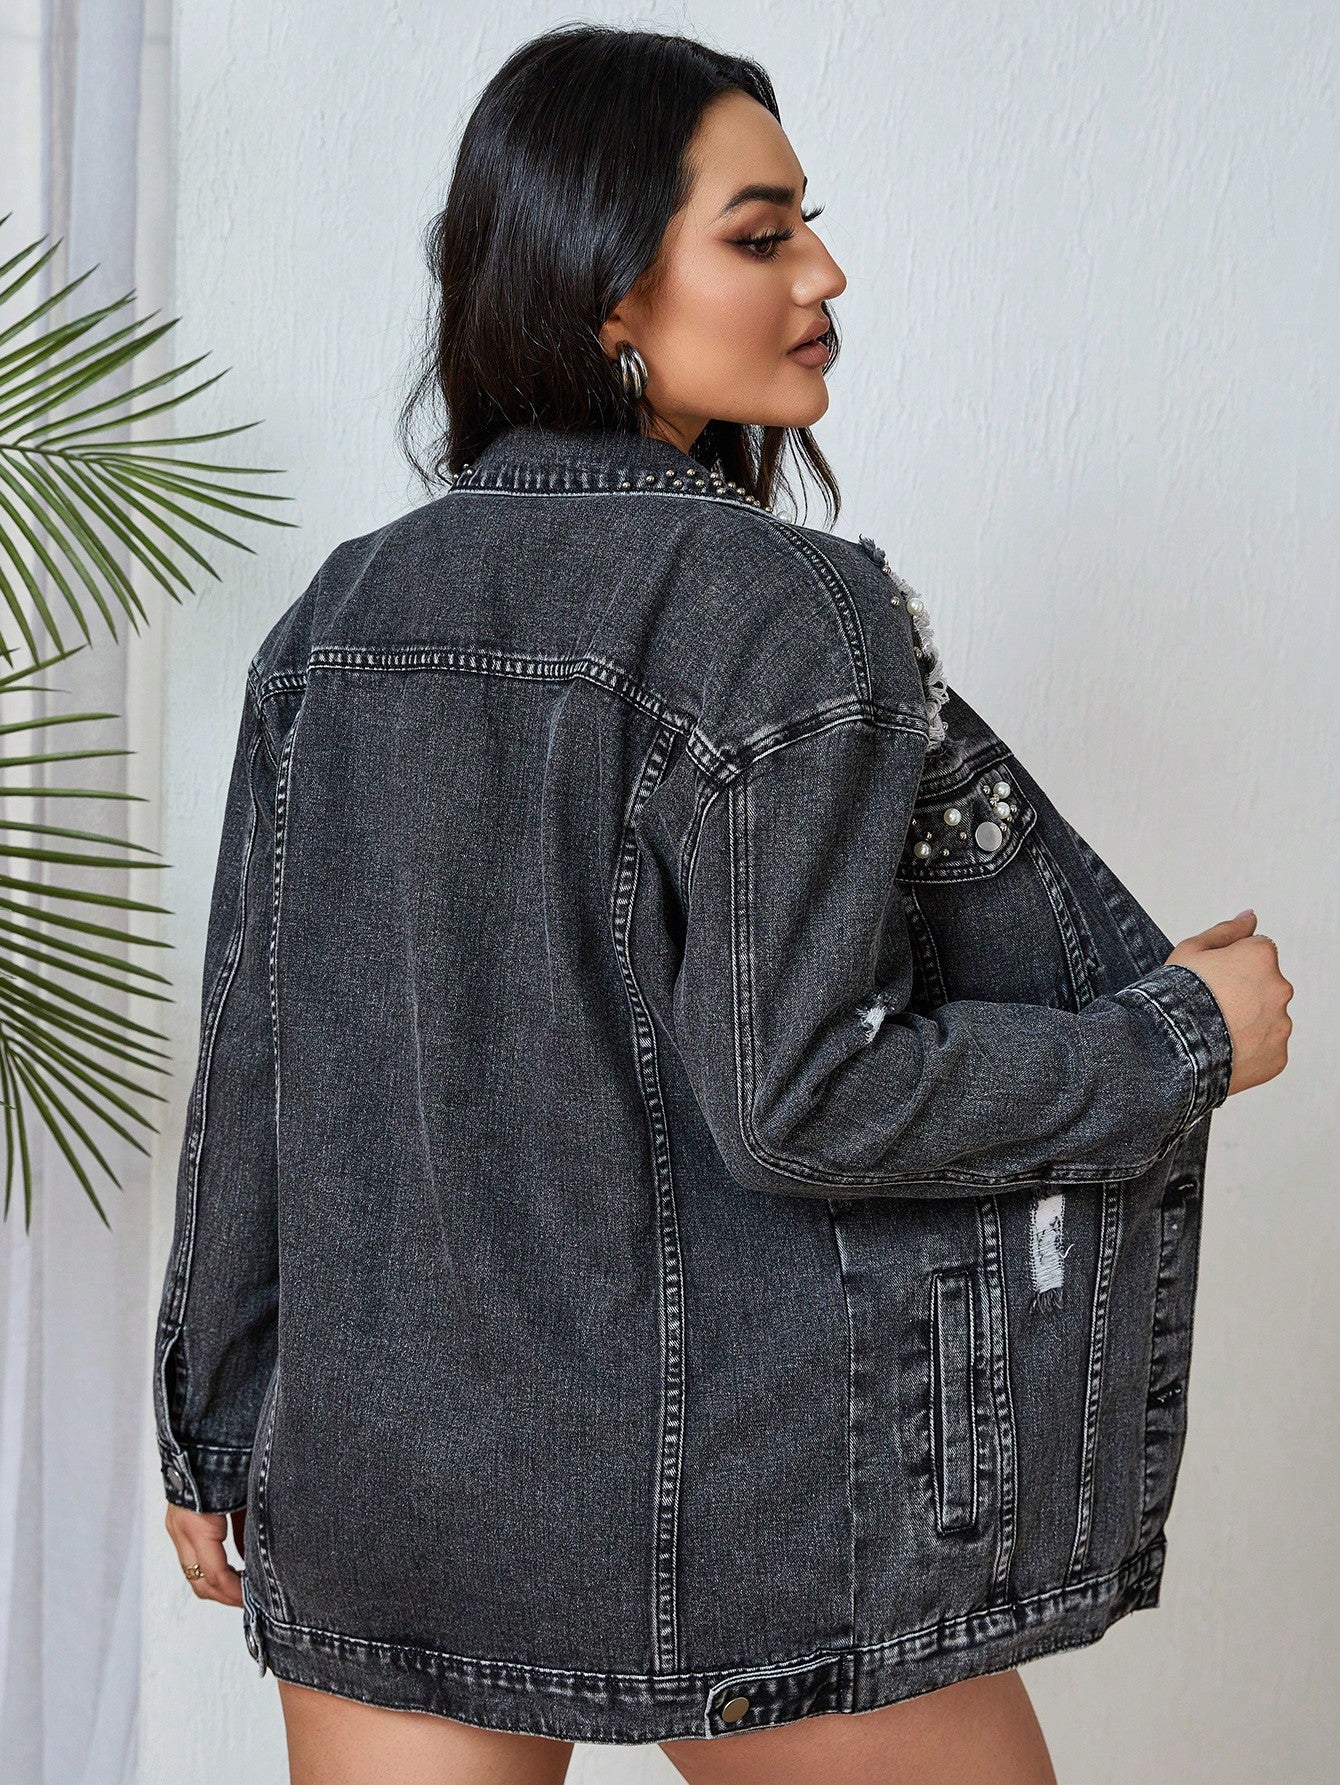 Edgy Elegance: Ripped Drop Shoulder Denim Coat with Pearls Beaded Detail